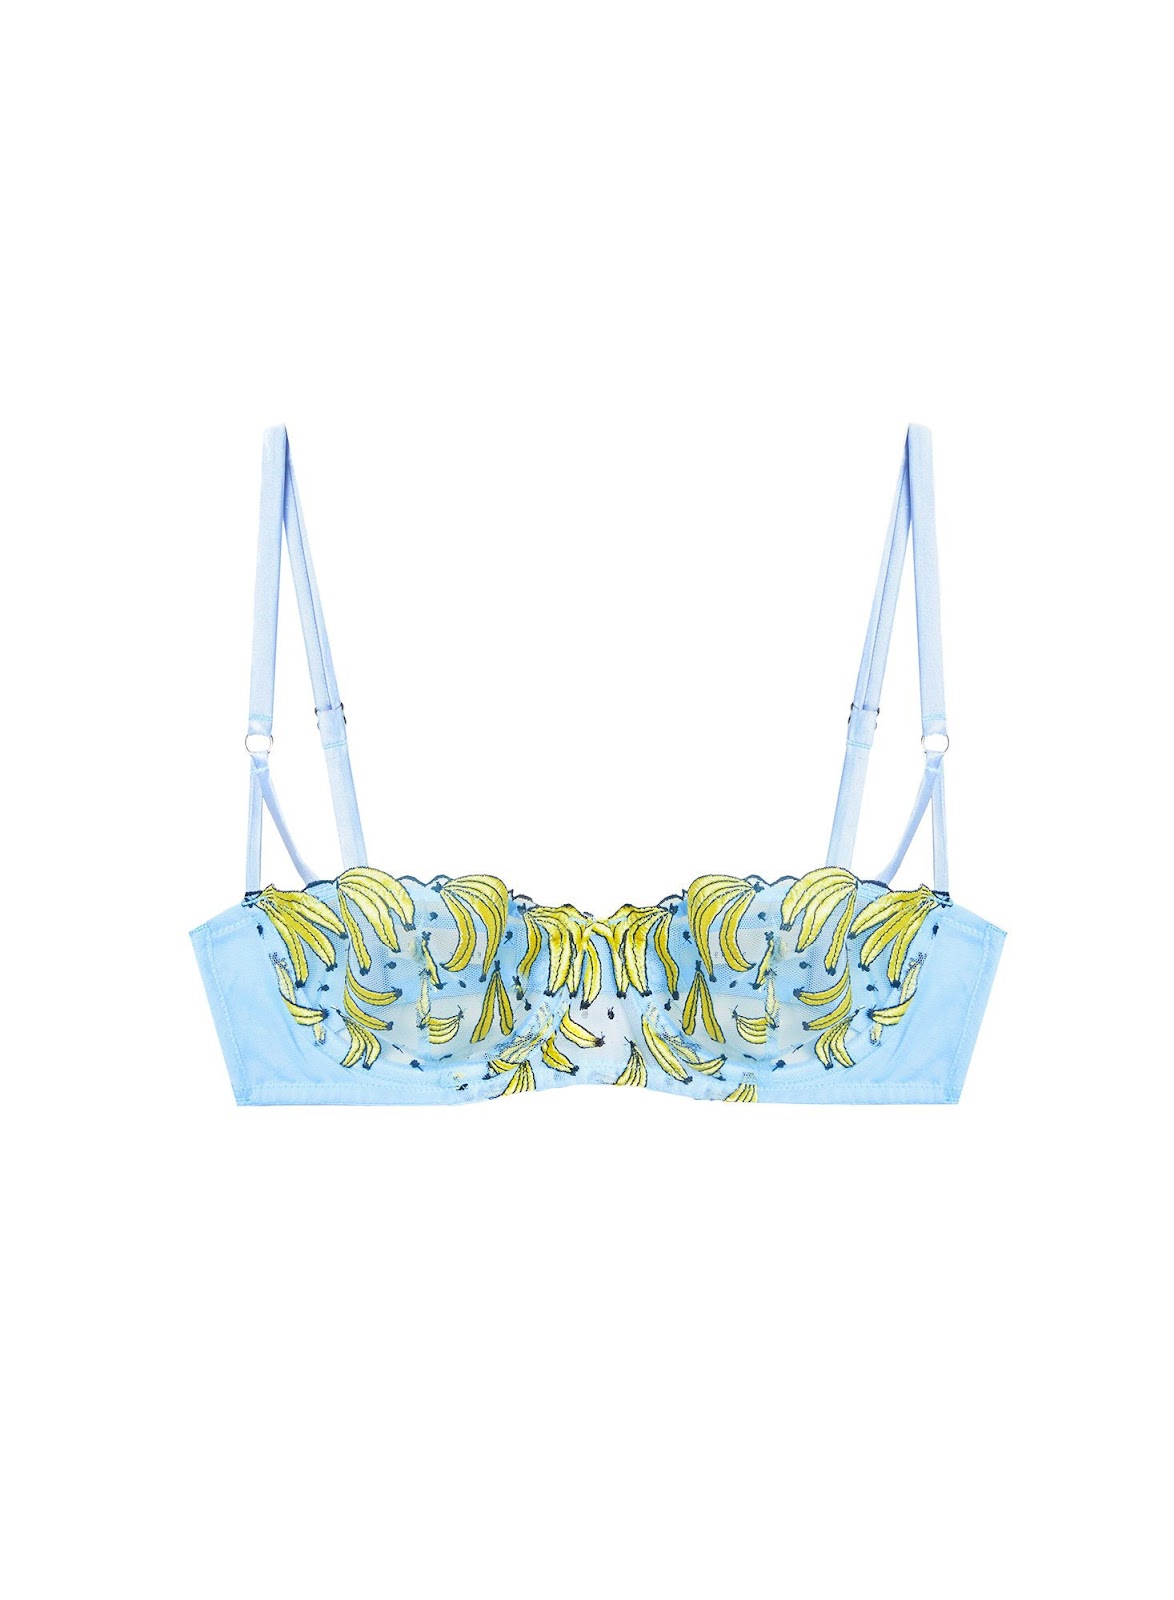 Five Festival-Worthy Bras to Rock This Summer – PQR News